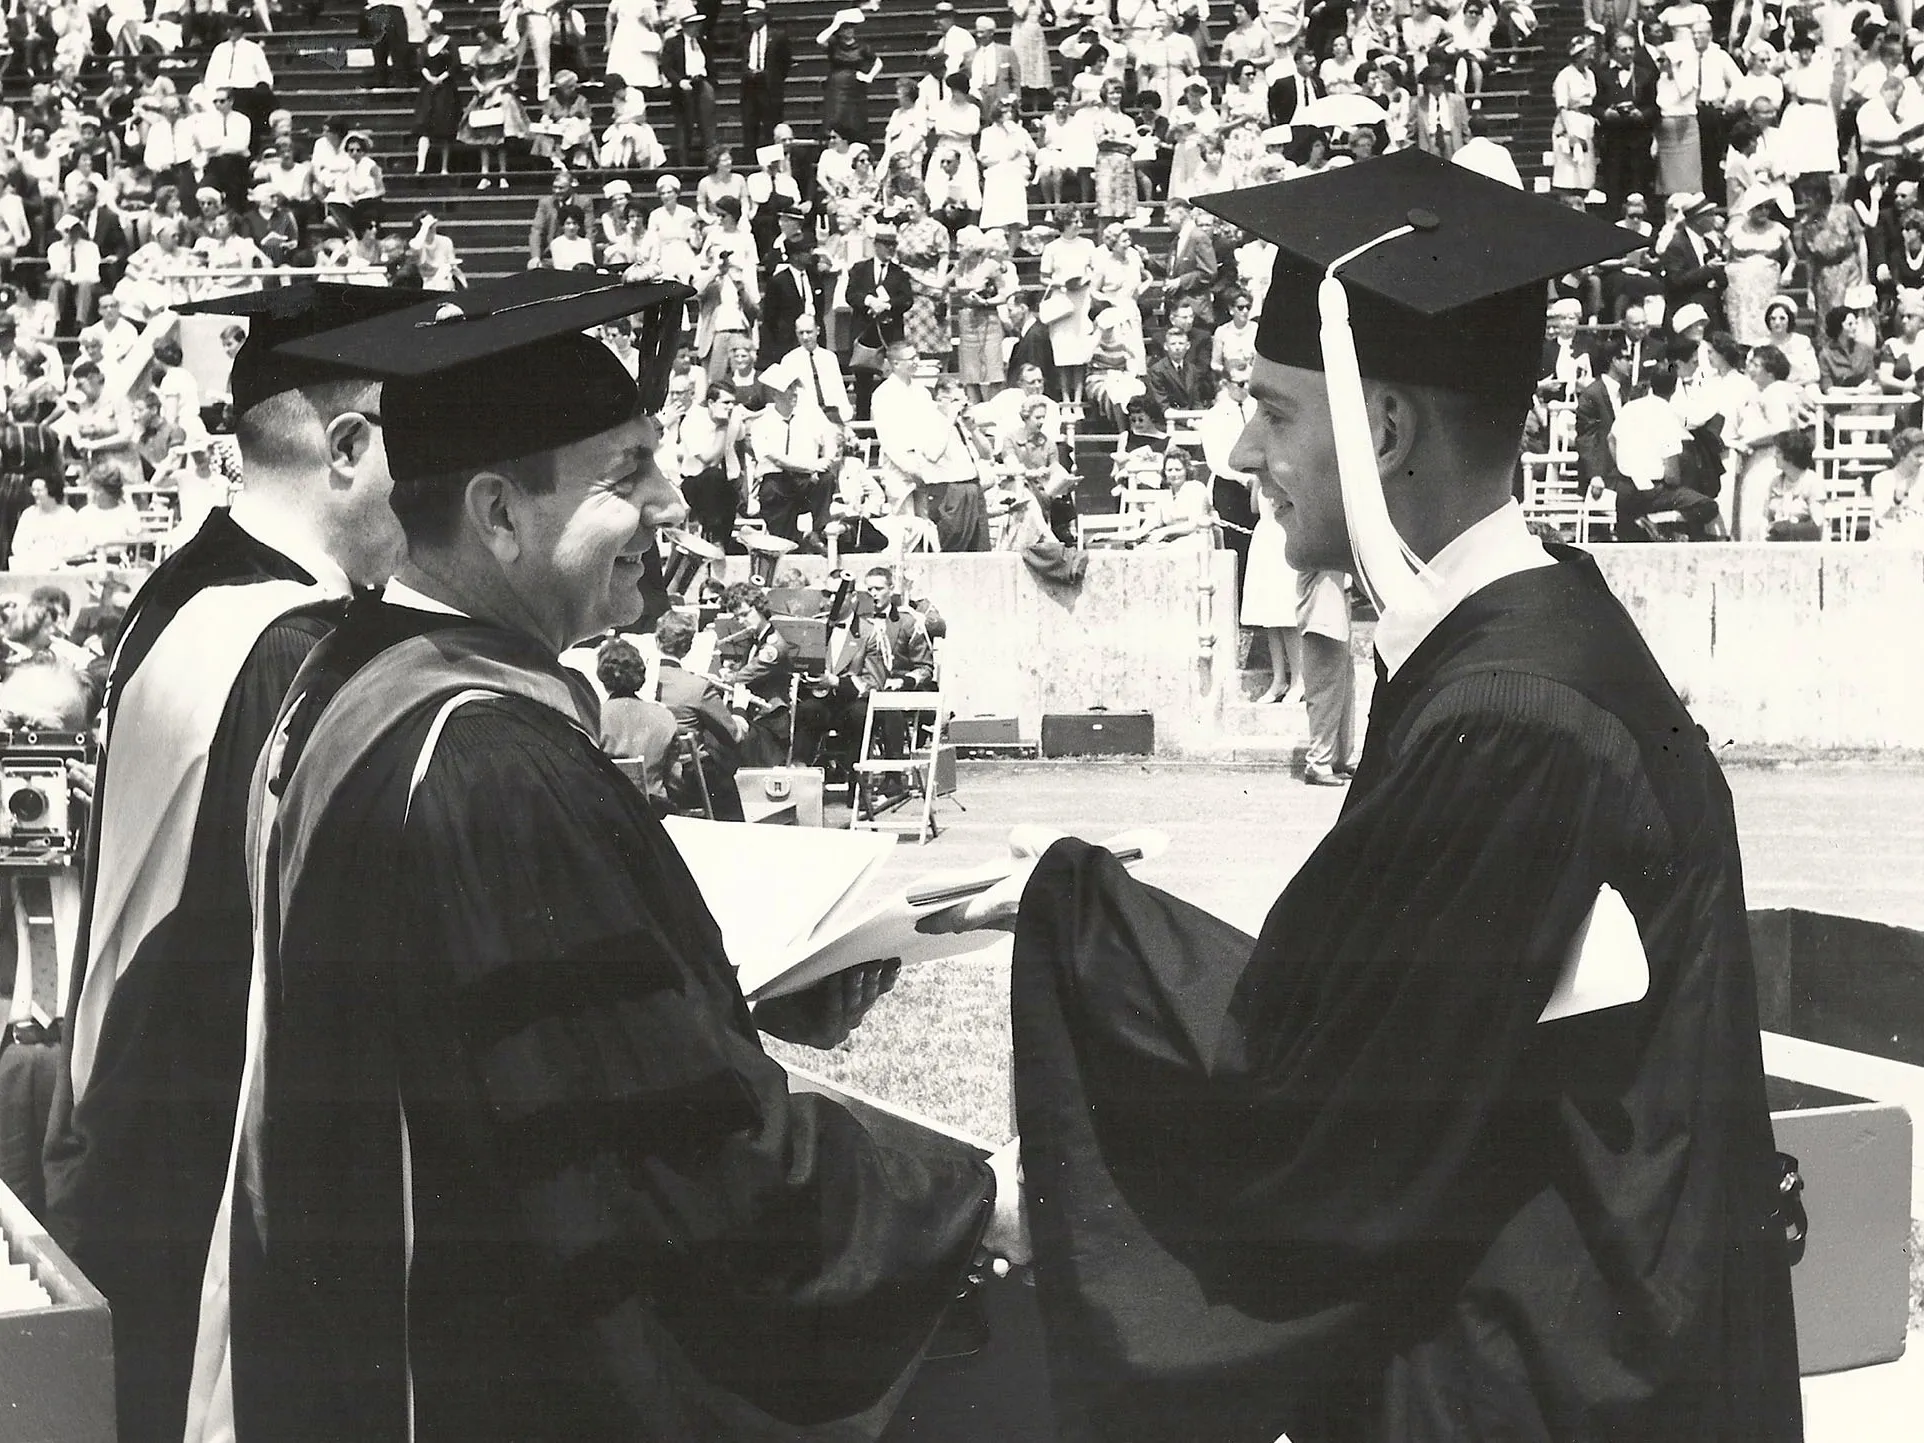 In a historical photo taken inside Ohio Stadium during a graduation commencement ceremony, a young man happily accepts his diploma from a pair of university leaders. All wear caps and gowns and smile. In the background, a crowd of spectators watches from the stands.